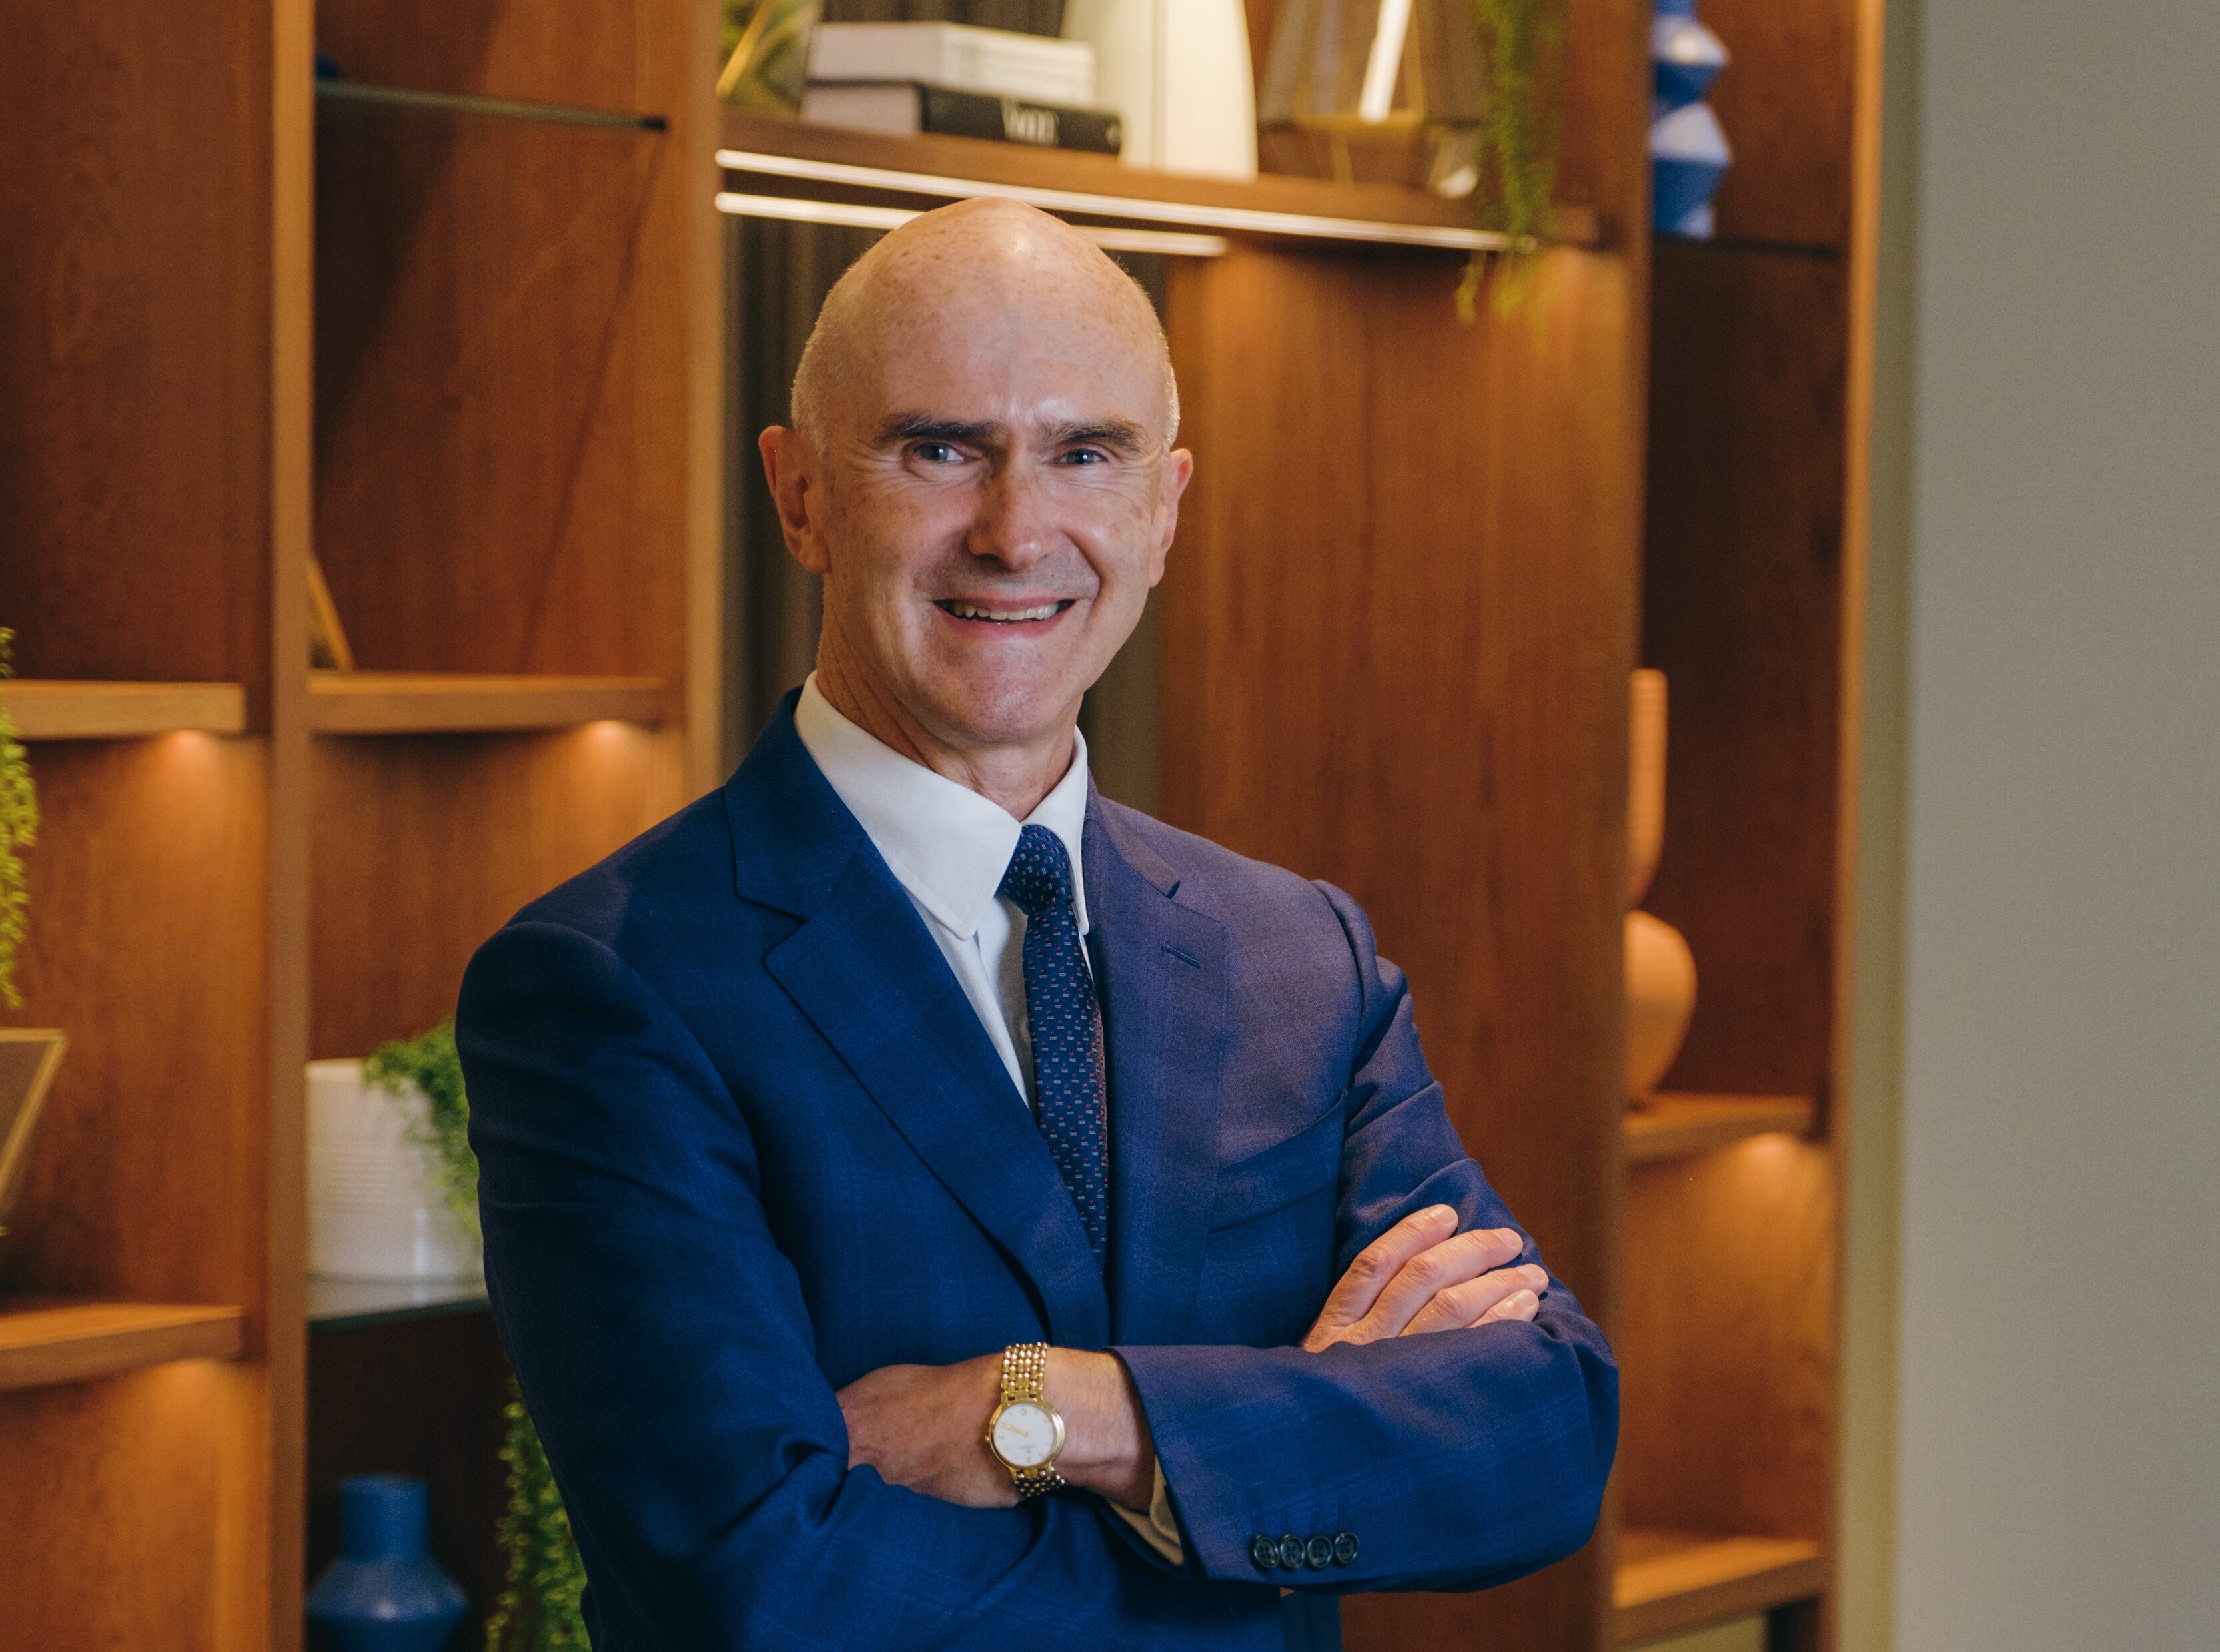 Adrian Ellis, Lowry hotel general manager, named 2022 Hotelier of the Year